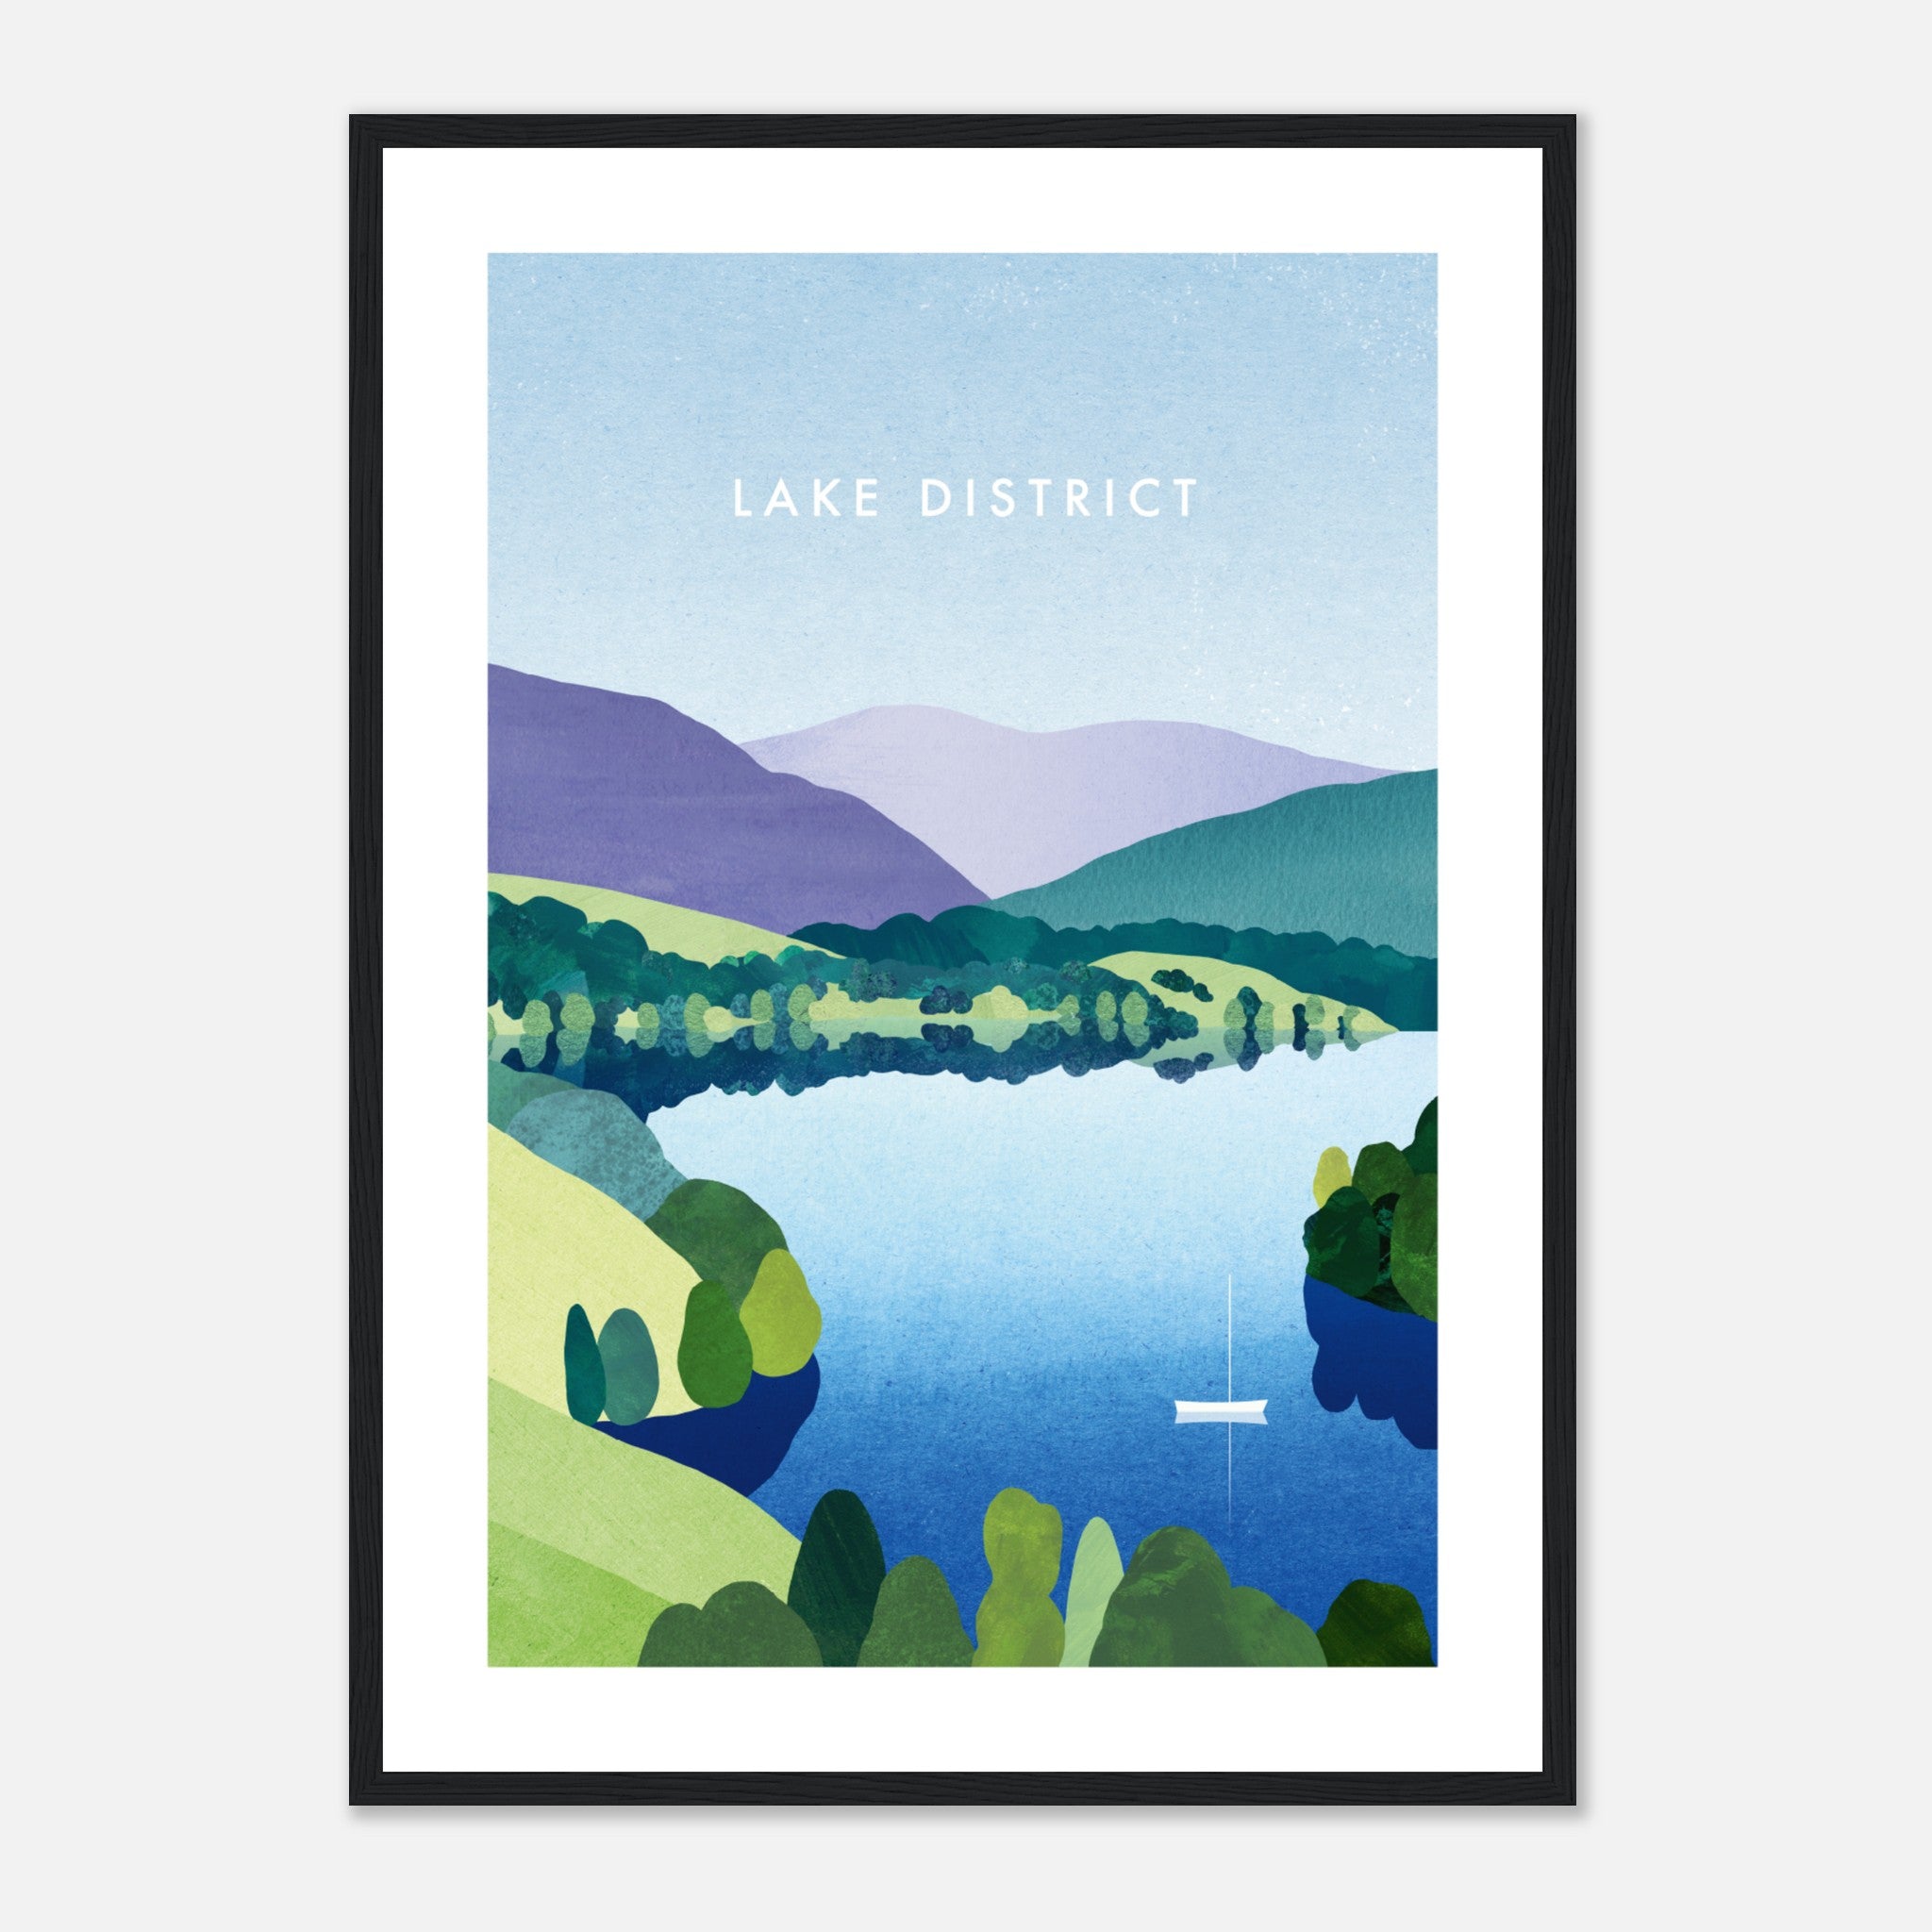 Lake District, Windemere Poster